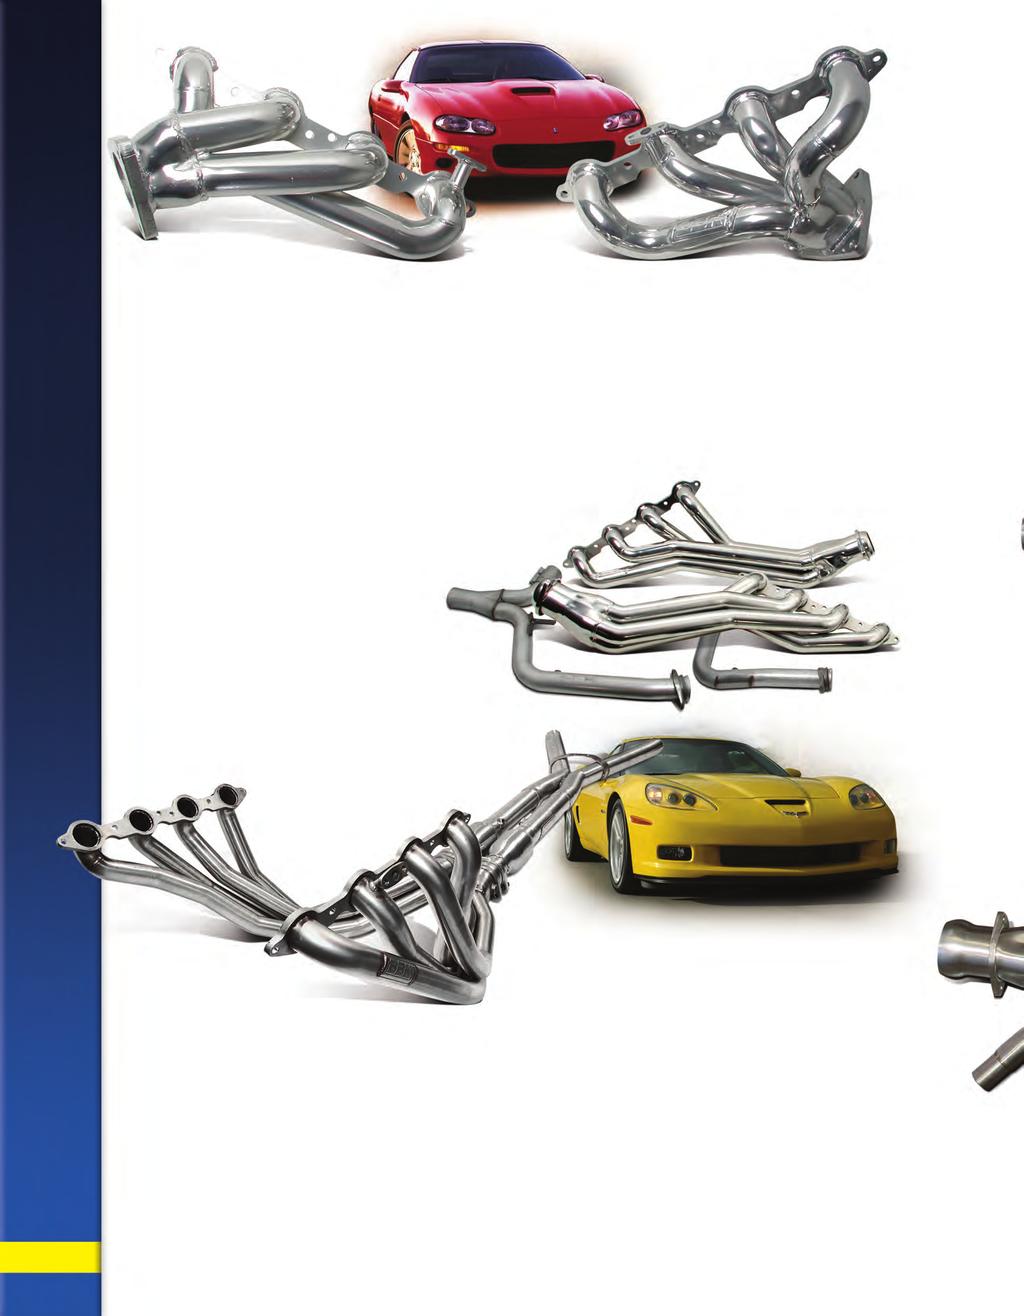 GM PERFORMANCE EXHAUST 1998 2002 1-3/4 LS-1 camaro / FIREBIRD These 1-3/4 performance tuned length headers for 1998-2002 LS1 powered Camaro/Firebird models are a simple way to bolt on 12-18